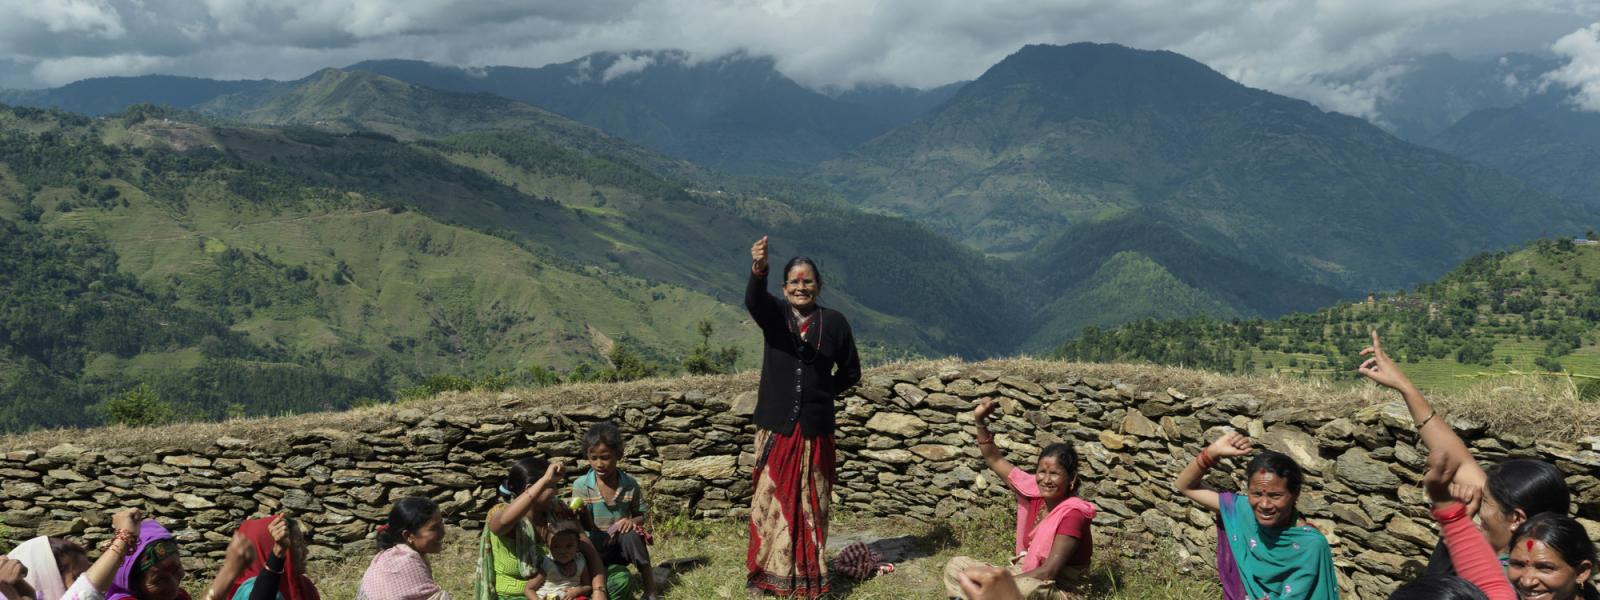 Women sit outside in a circle and raise their hands as one woman stands. In the background are steep rolling hills